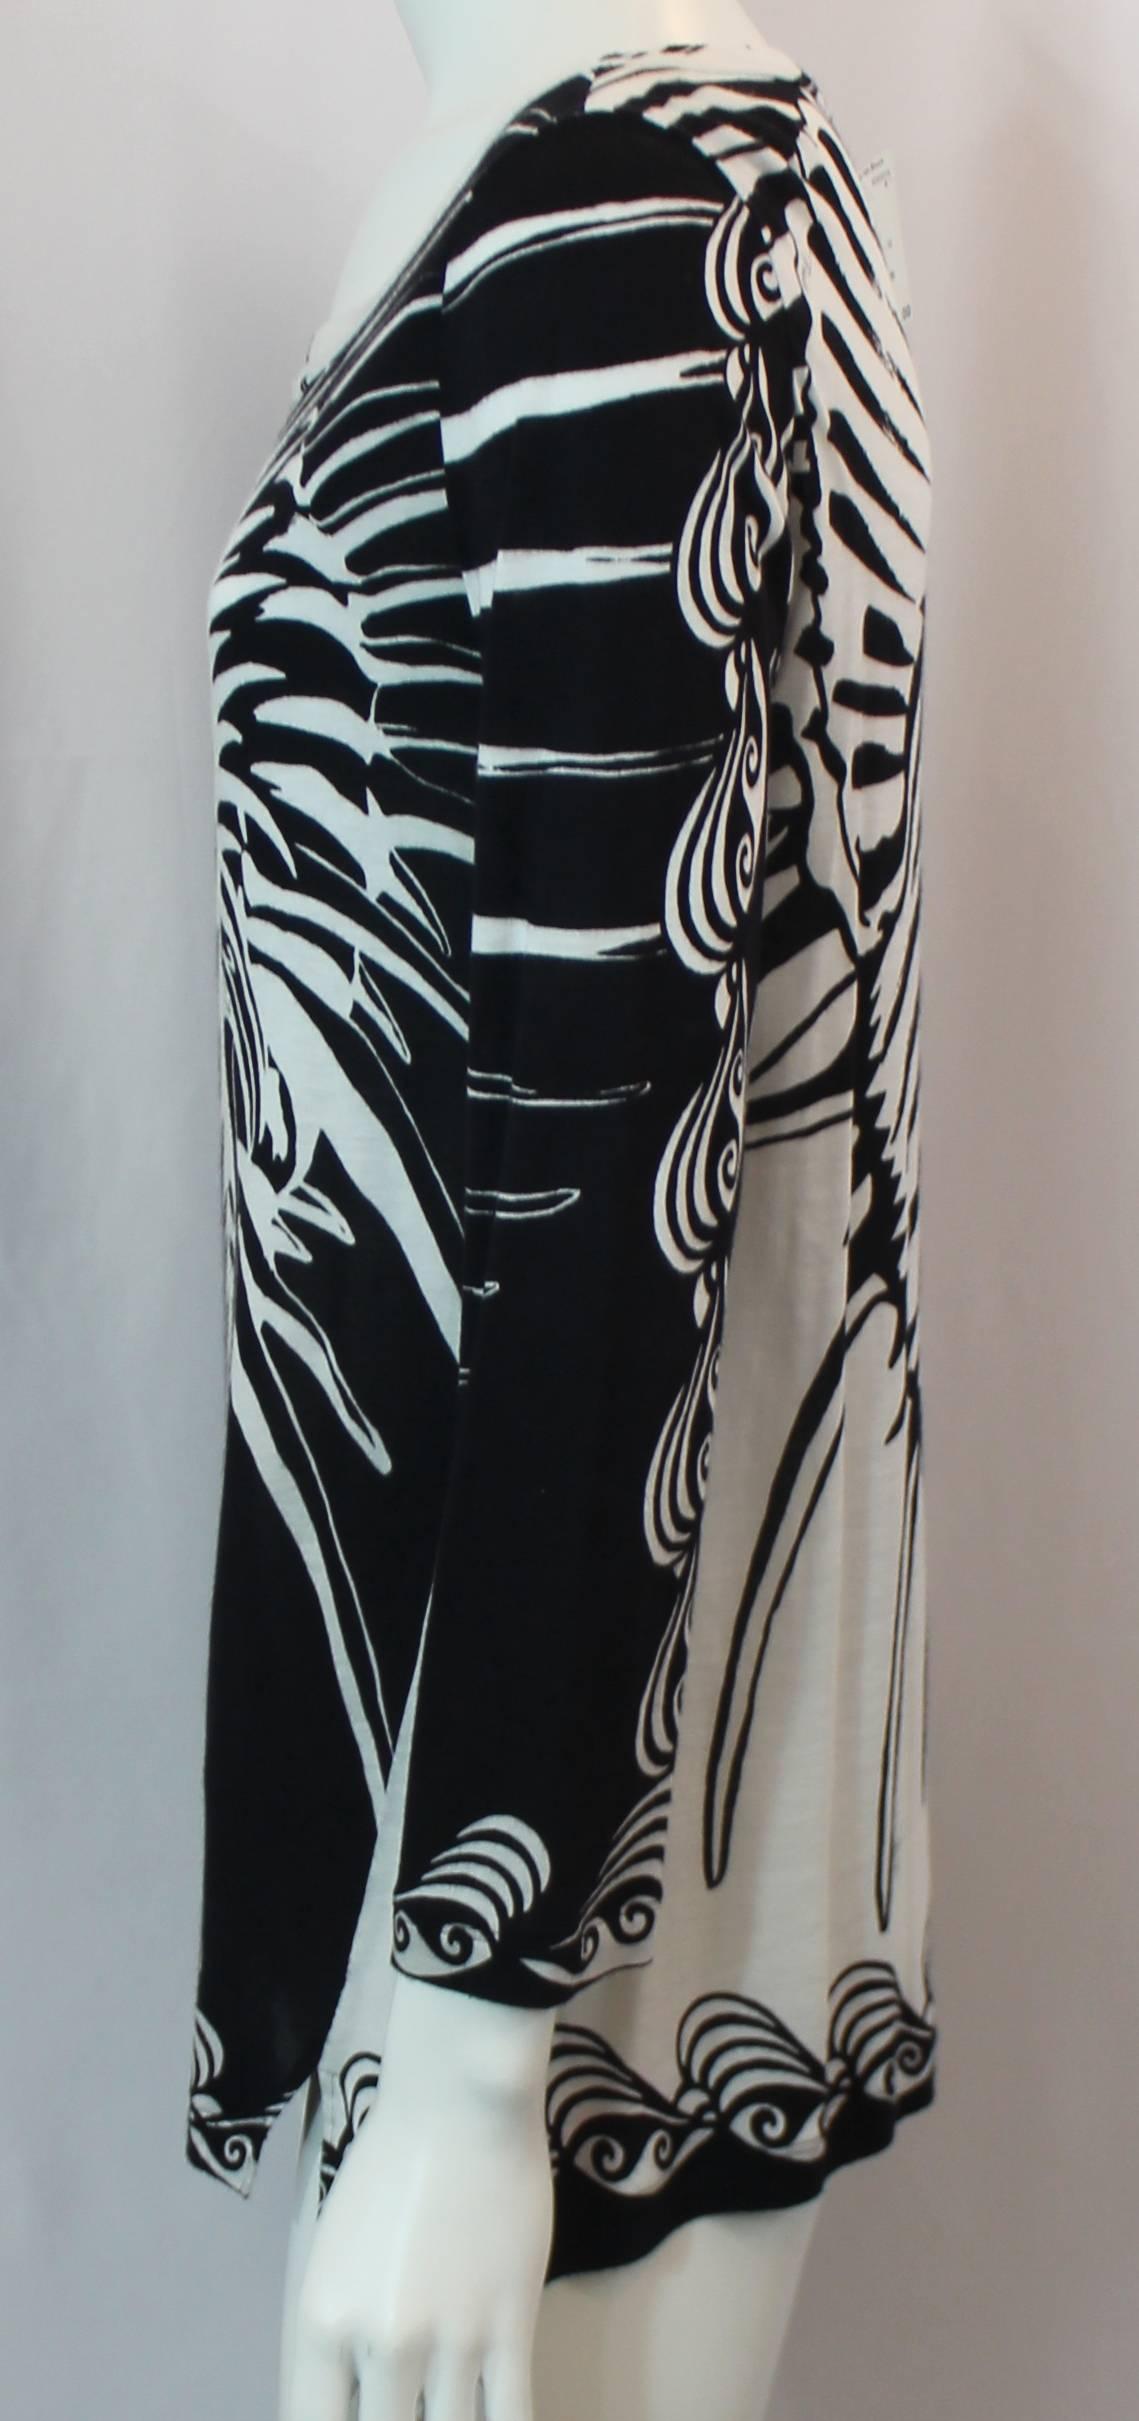 Emilio Pucci Black and White Printed Cotton Tunic Top - M In Excellent Condition In West Palm Beach, FL